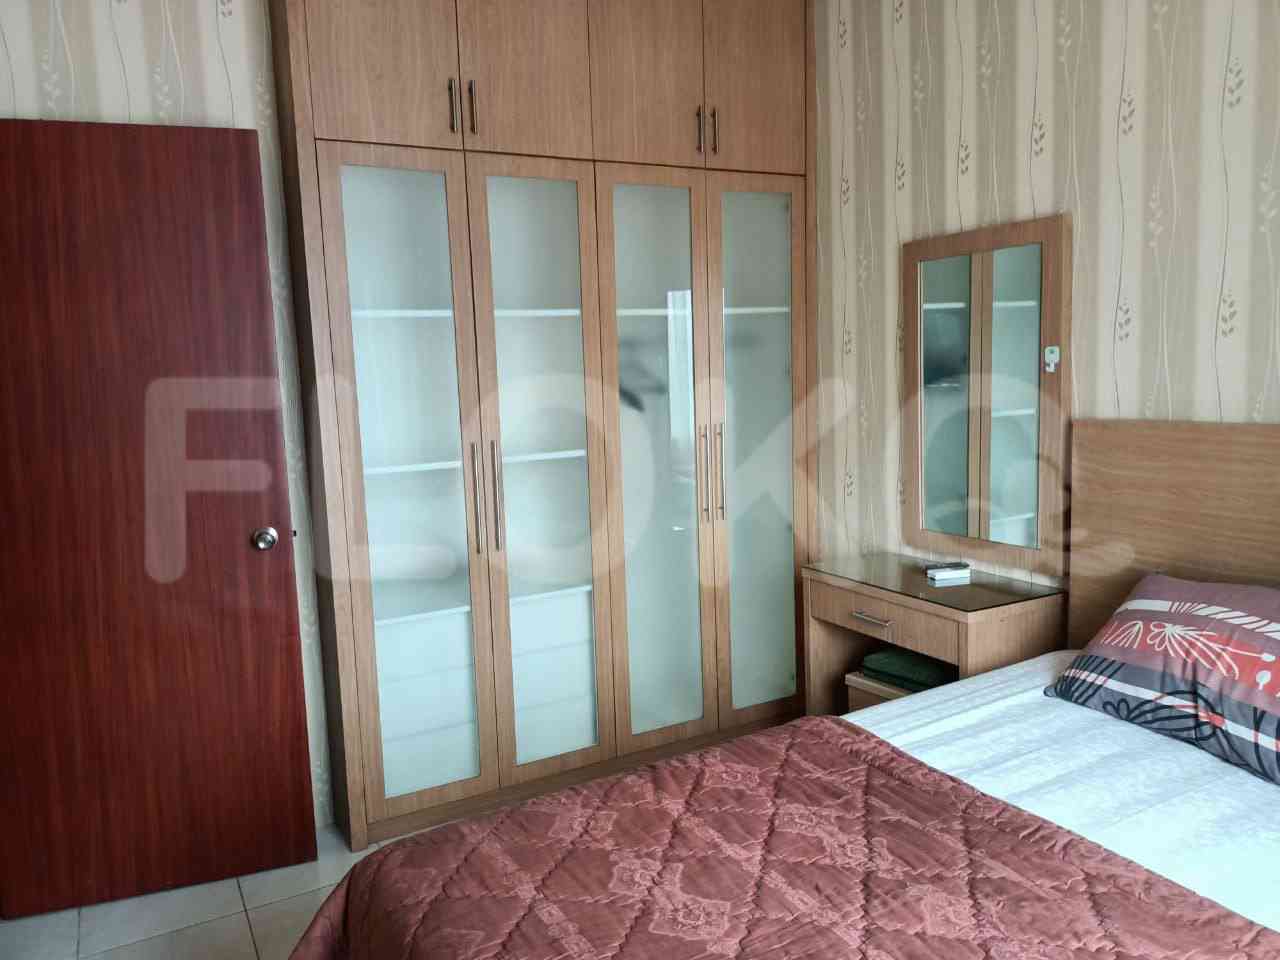 2 Bedroom on 7th Floor for Rent in Sudirman Park Apartment - ftad1f 2